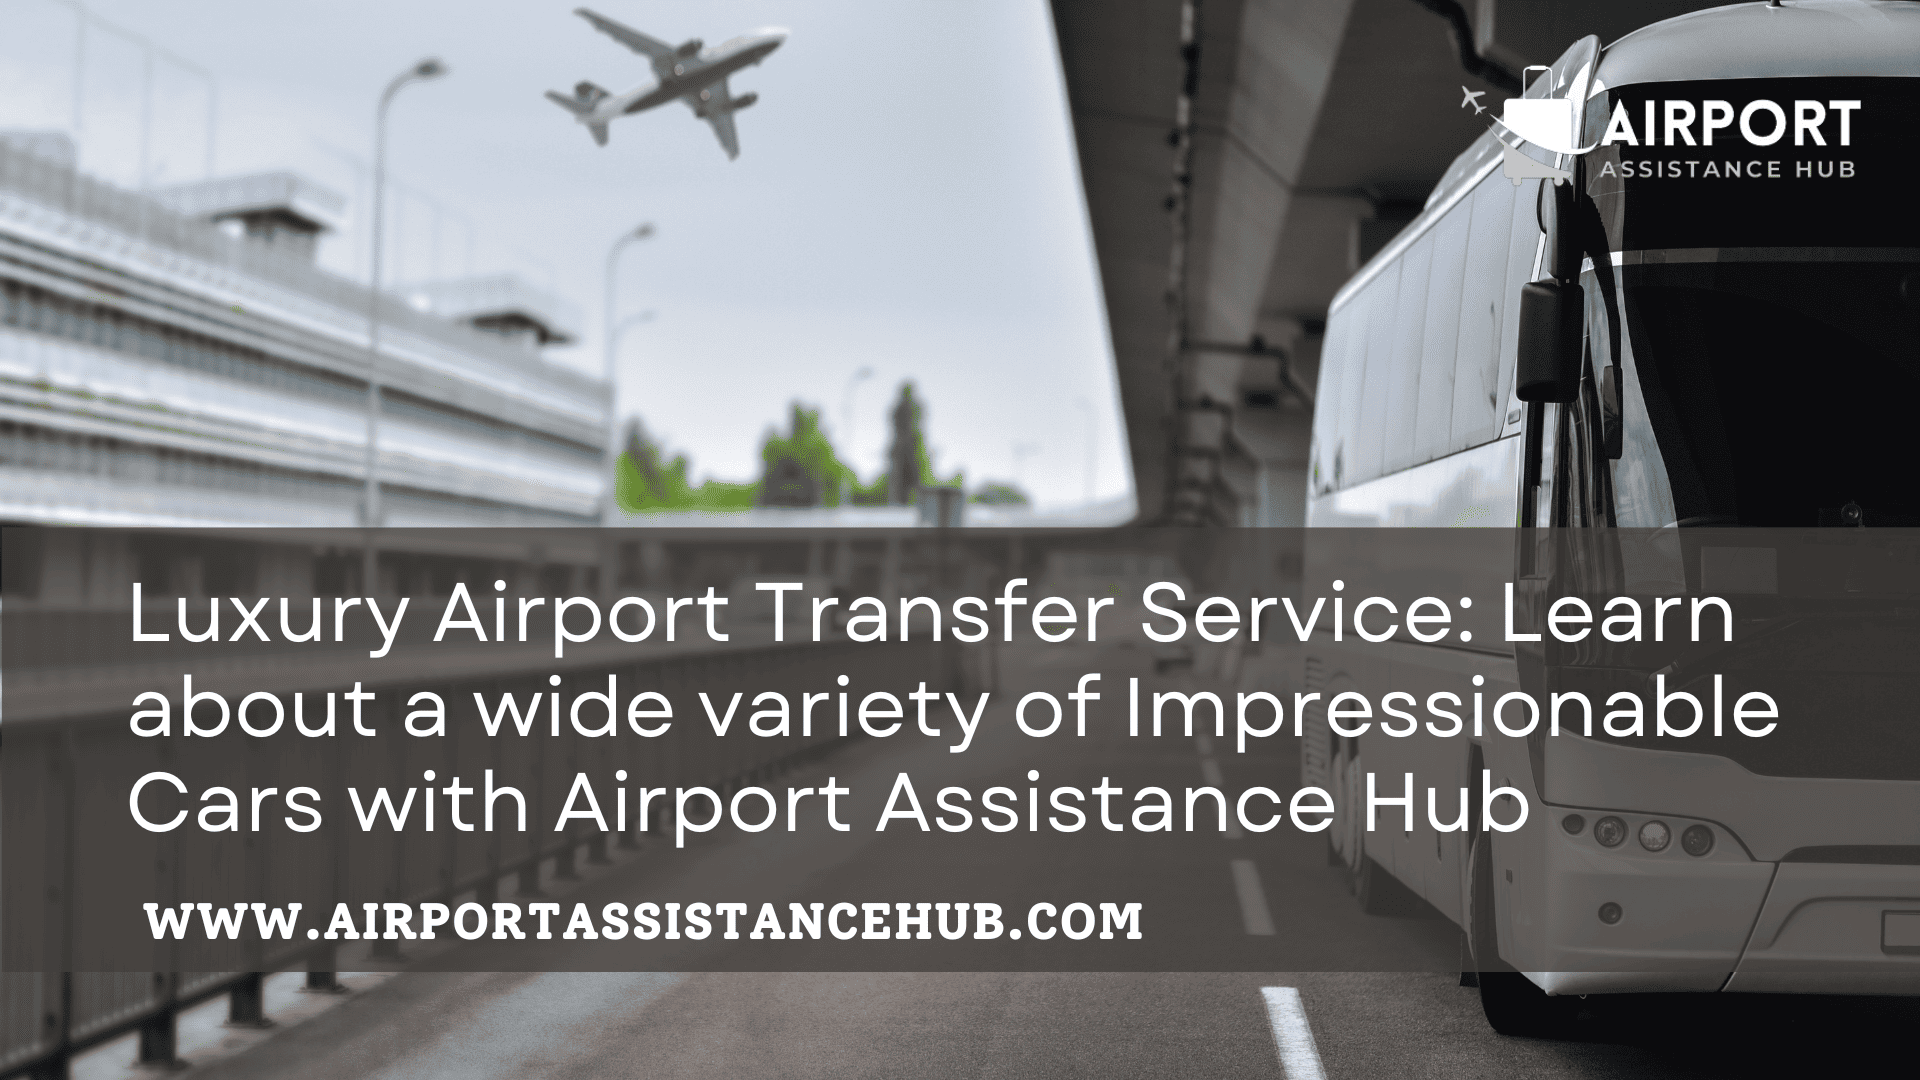 Luxury Airport Transfer Service: Learn about a wide variety of Impressionable Cars with Airport Assistance Hub